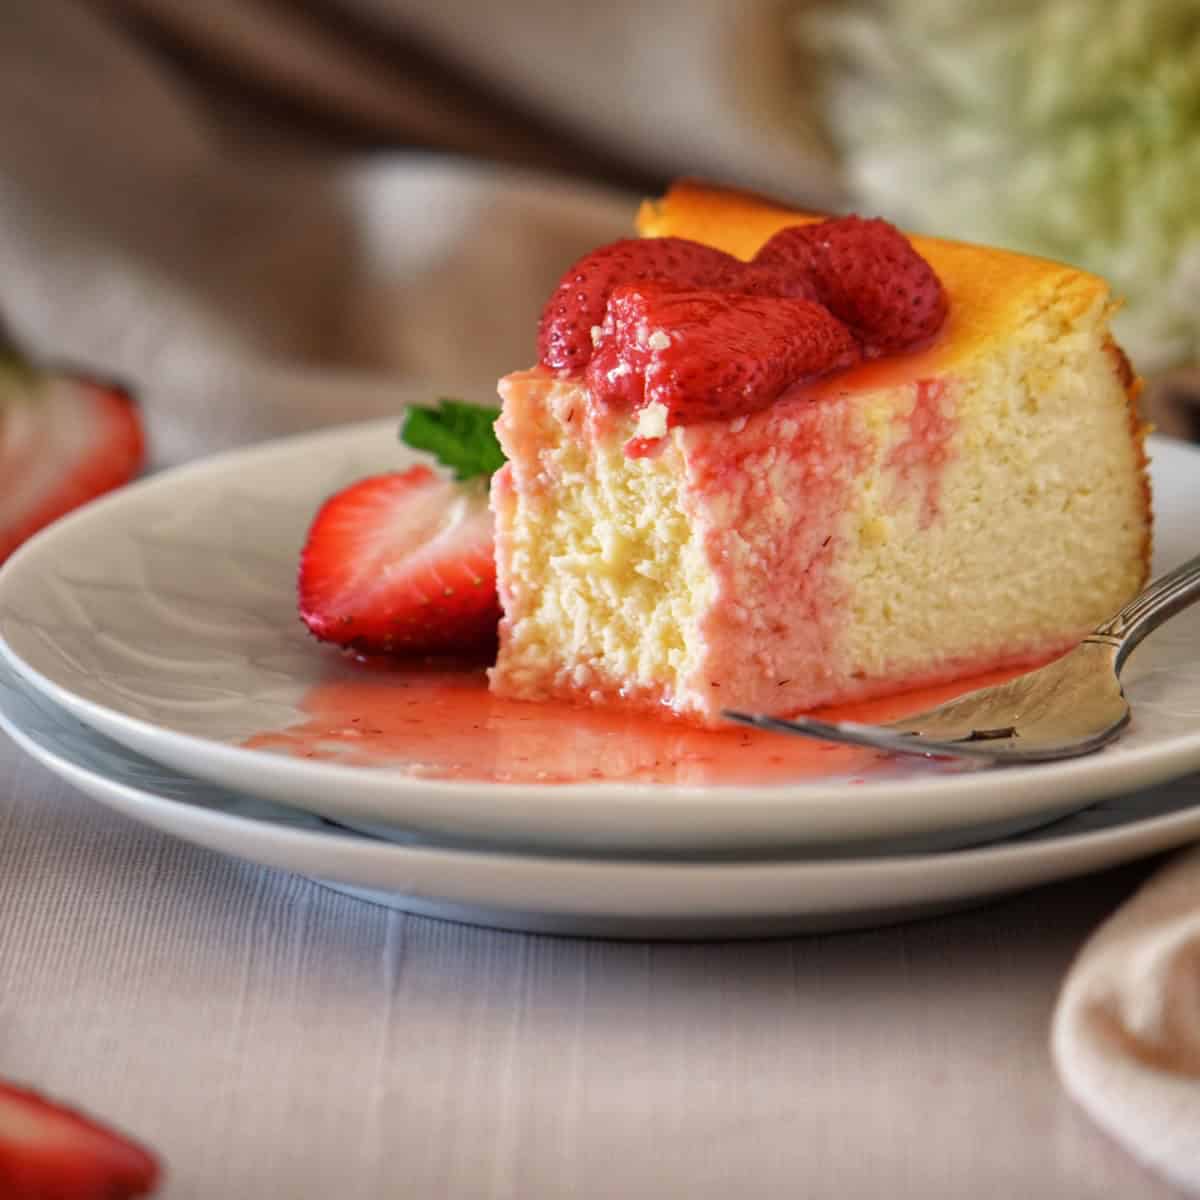 A slice of ricotta cheesecake on a white plate.